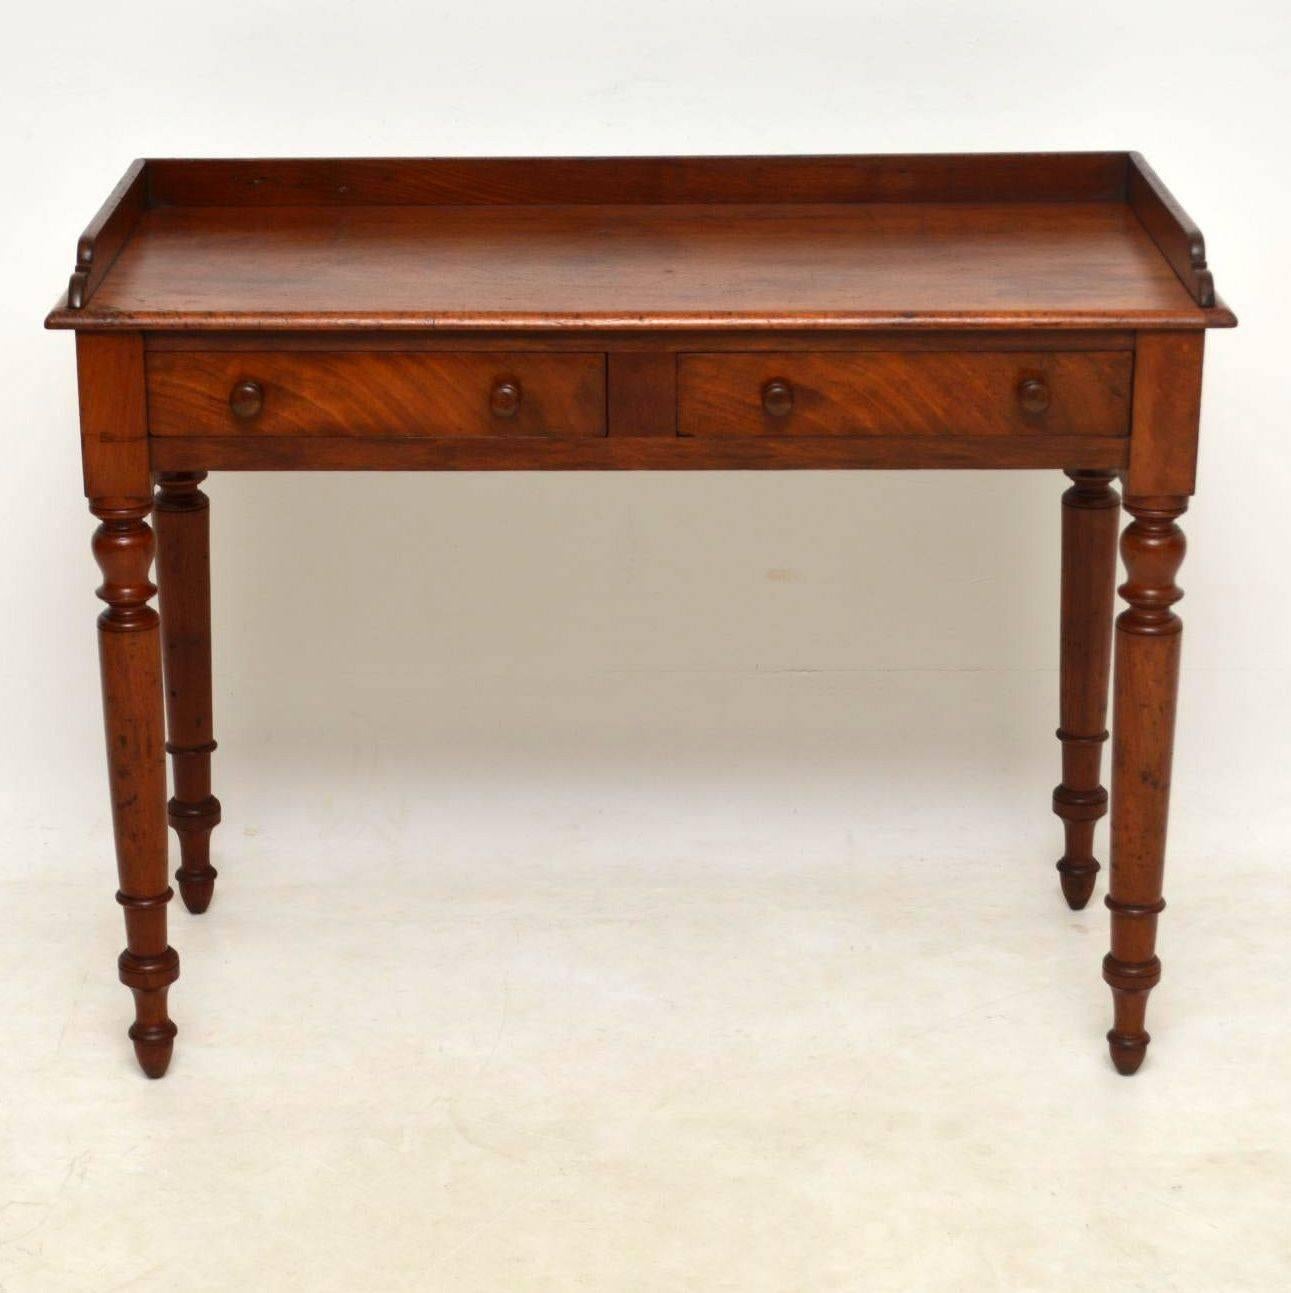 Antique Victorian mahogany writing table with the original gallery on the back and sides. It’s in good original condition, with plenty of character and natural distressing. There are two drawers with turned mahogany handles and the legs are